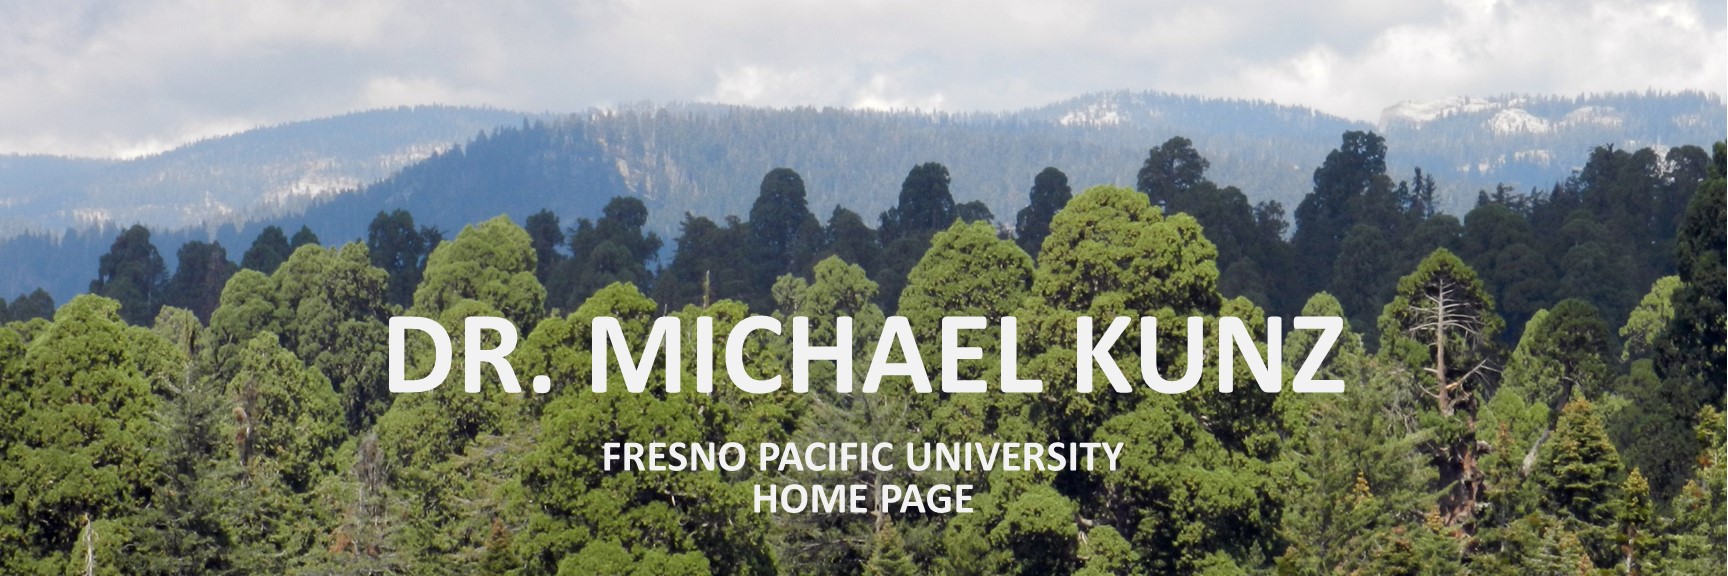 giant forest and kunz homepage banner